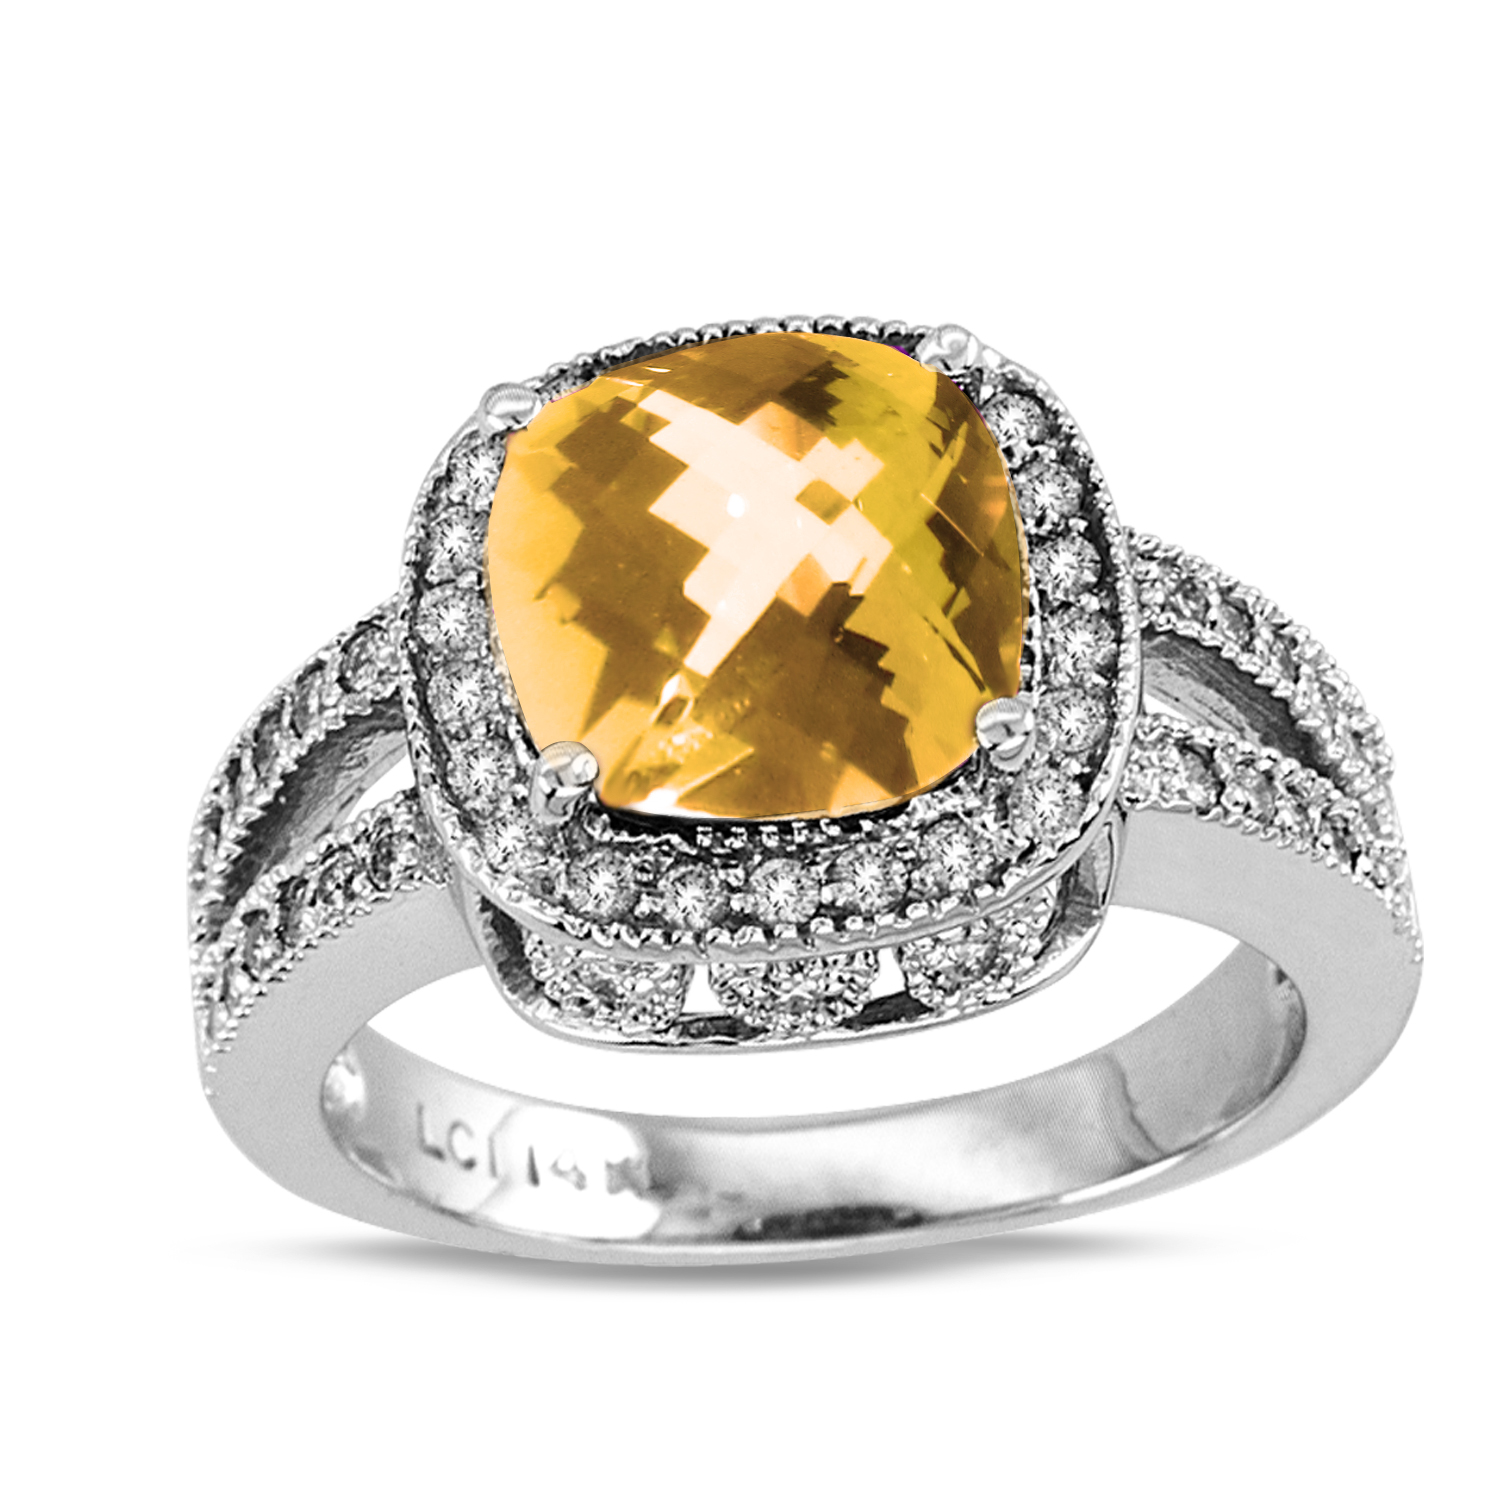 View 14k Gold Split Shank Ring with 0.50ct tw of Round Diamonds and 9mm Cushion Checkerboard Cut Citrin Center Stone